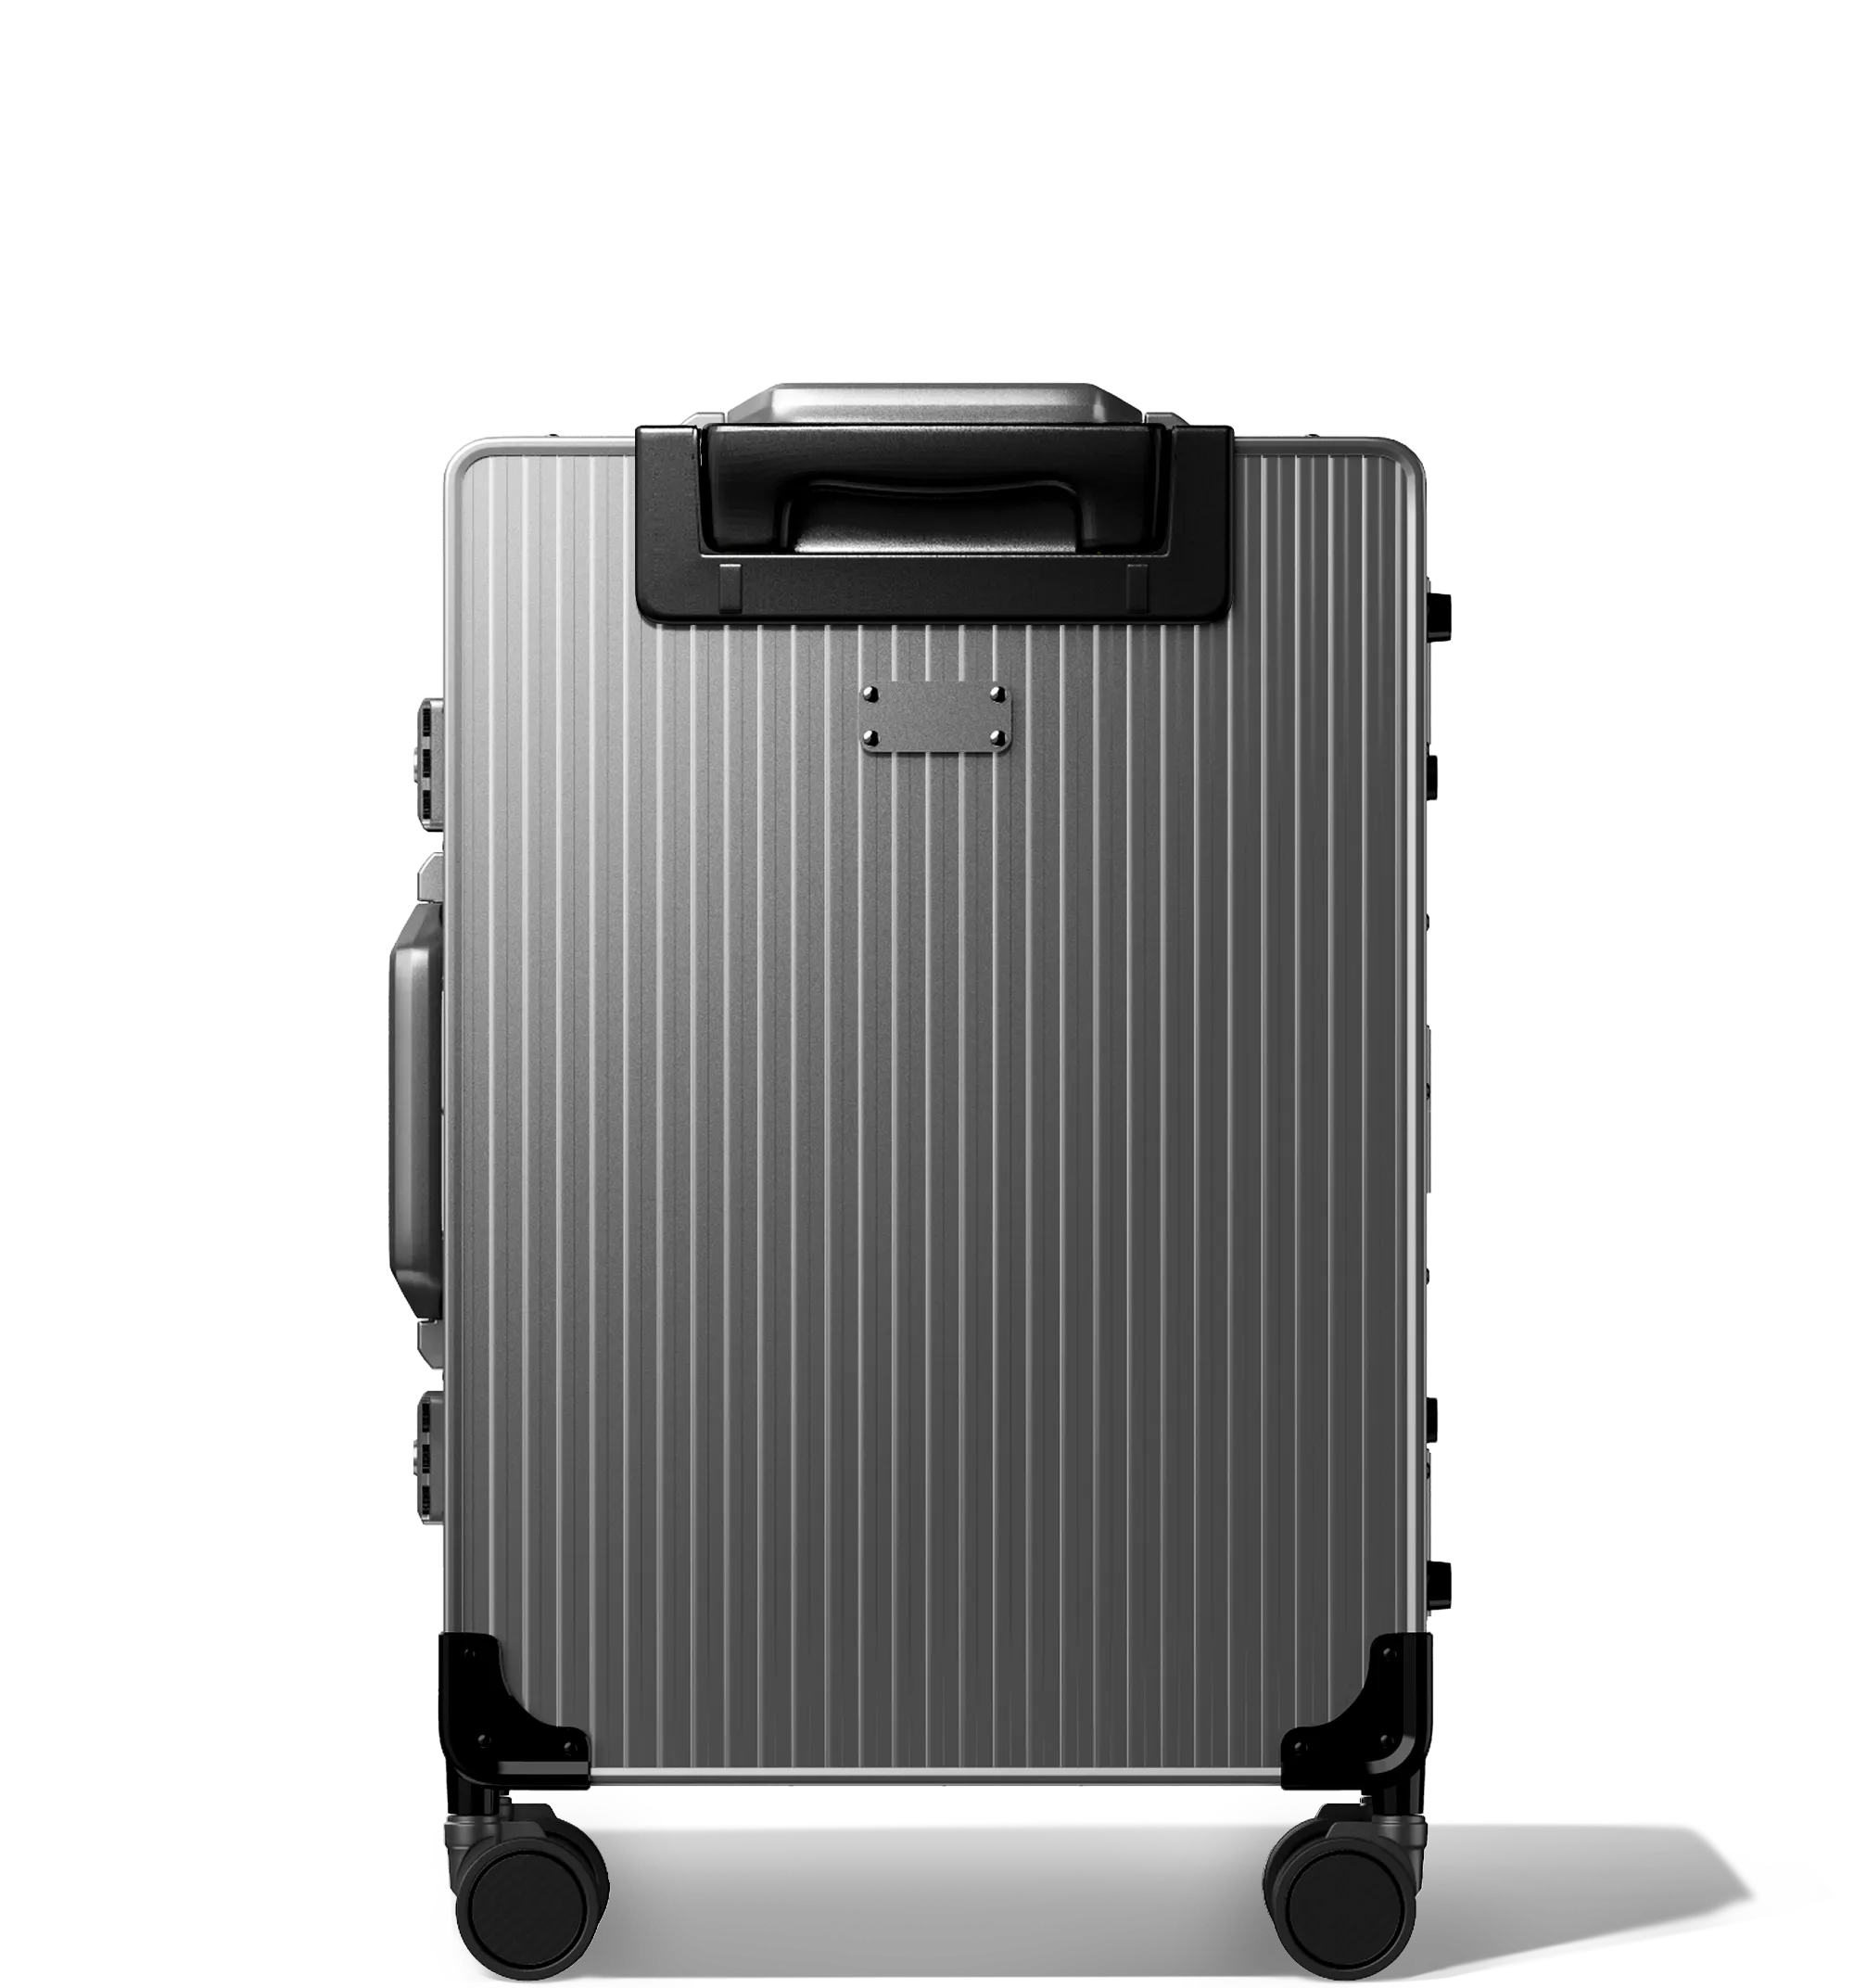 Frontal view of a Gun Metal Cabin in 56/20 , vertical hard-shell aluminium Luggage with ribbed texture, featuring a top handle, side latches, and four multi-directional spinner wheels, against a white background.